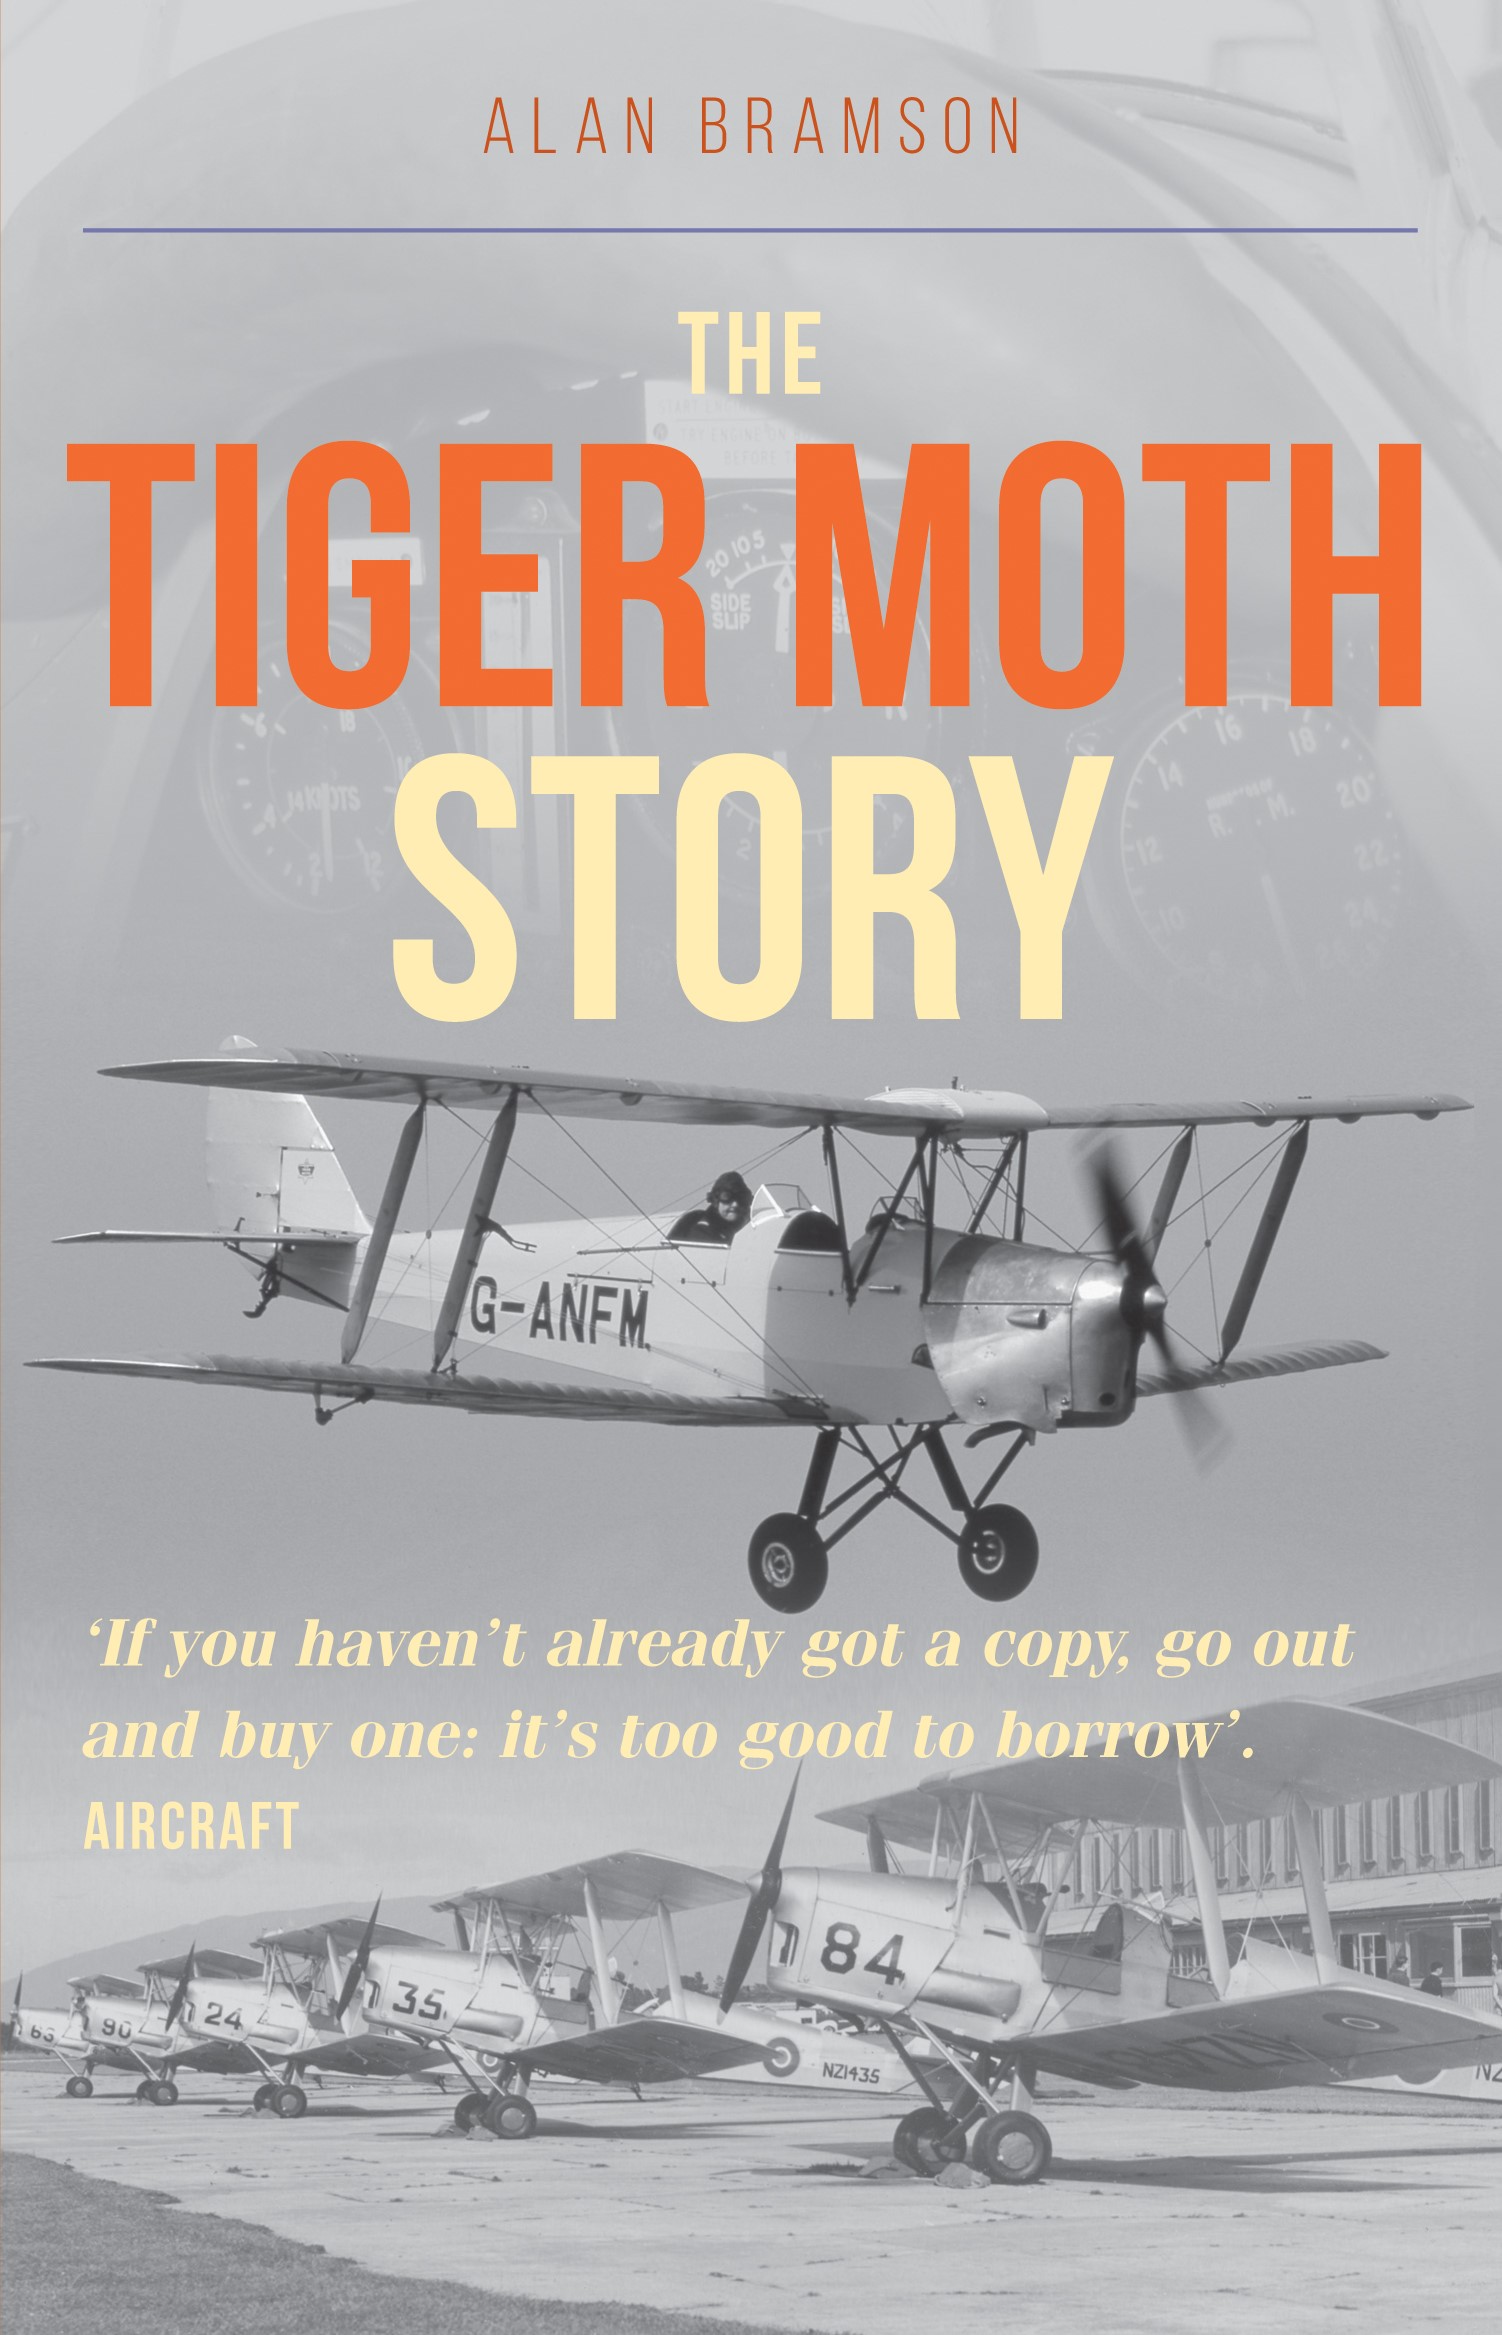 The Tiger Moth Story - 10-14.99